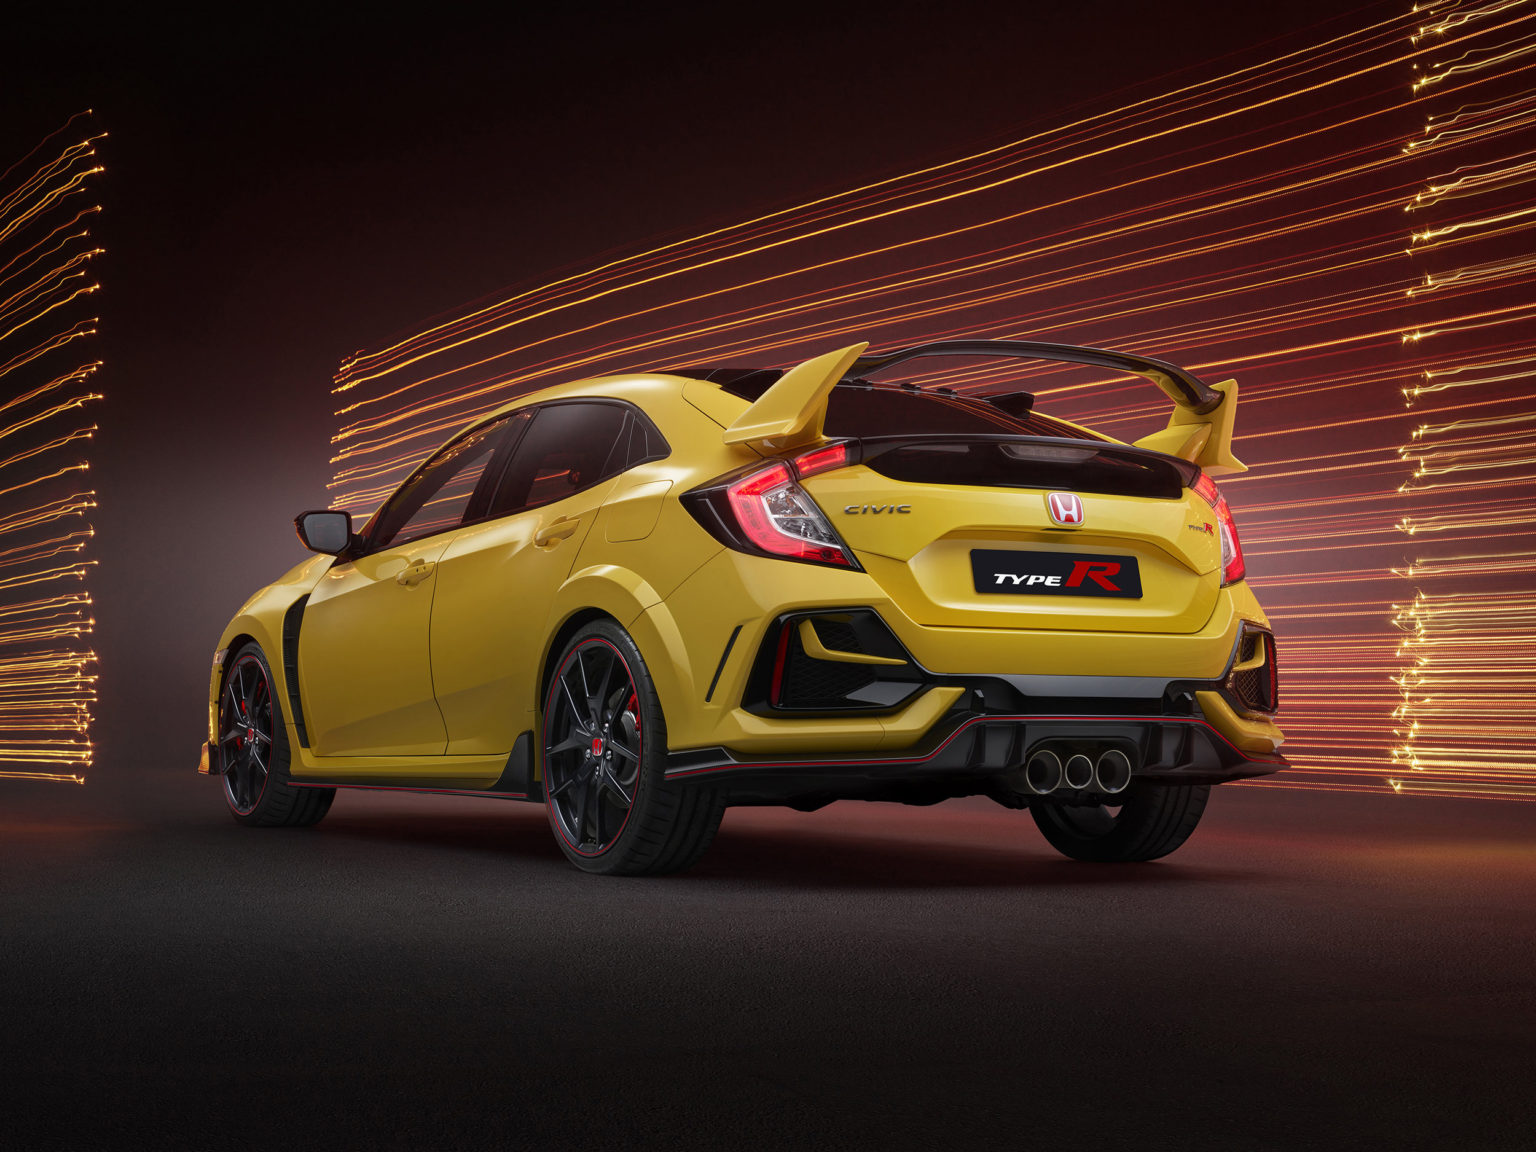 Honda has teamed up with Omaze to auction off a 2021 Honda Civic Type R to benefit HBCUs.